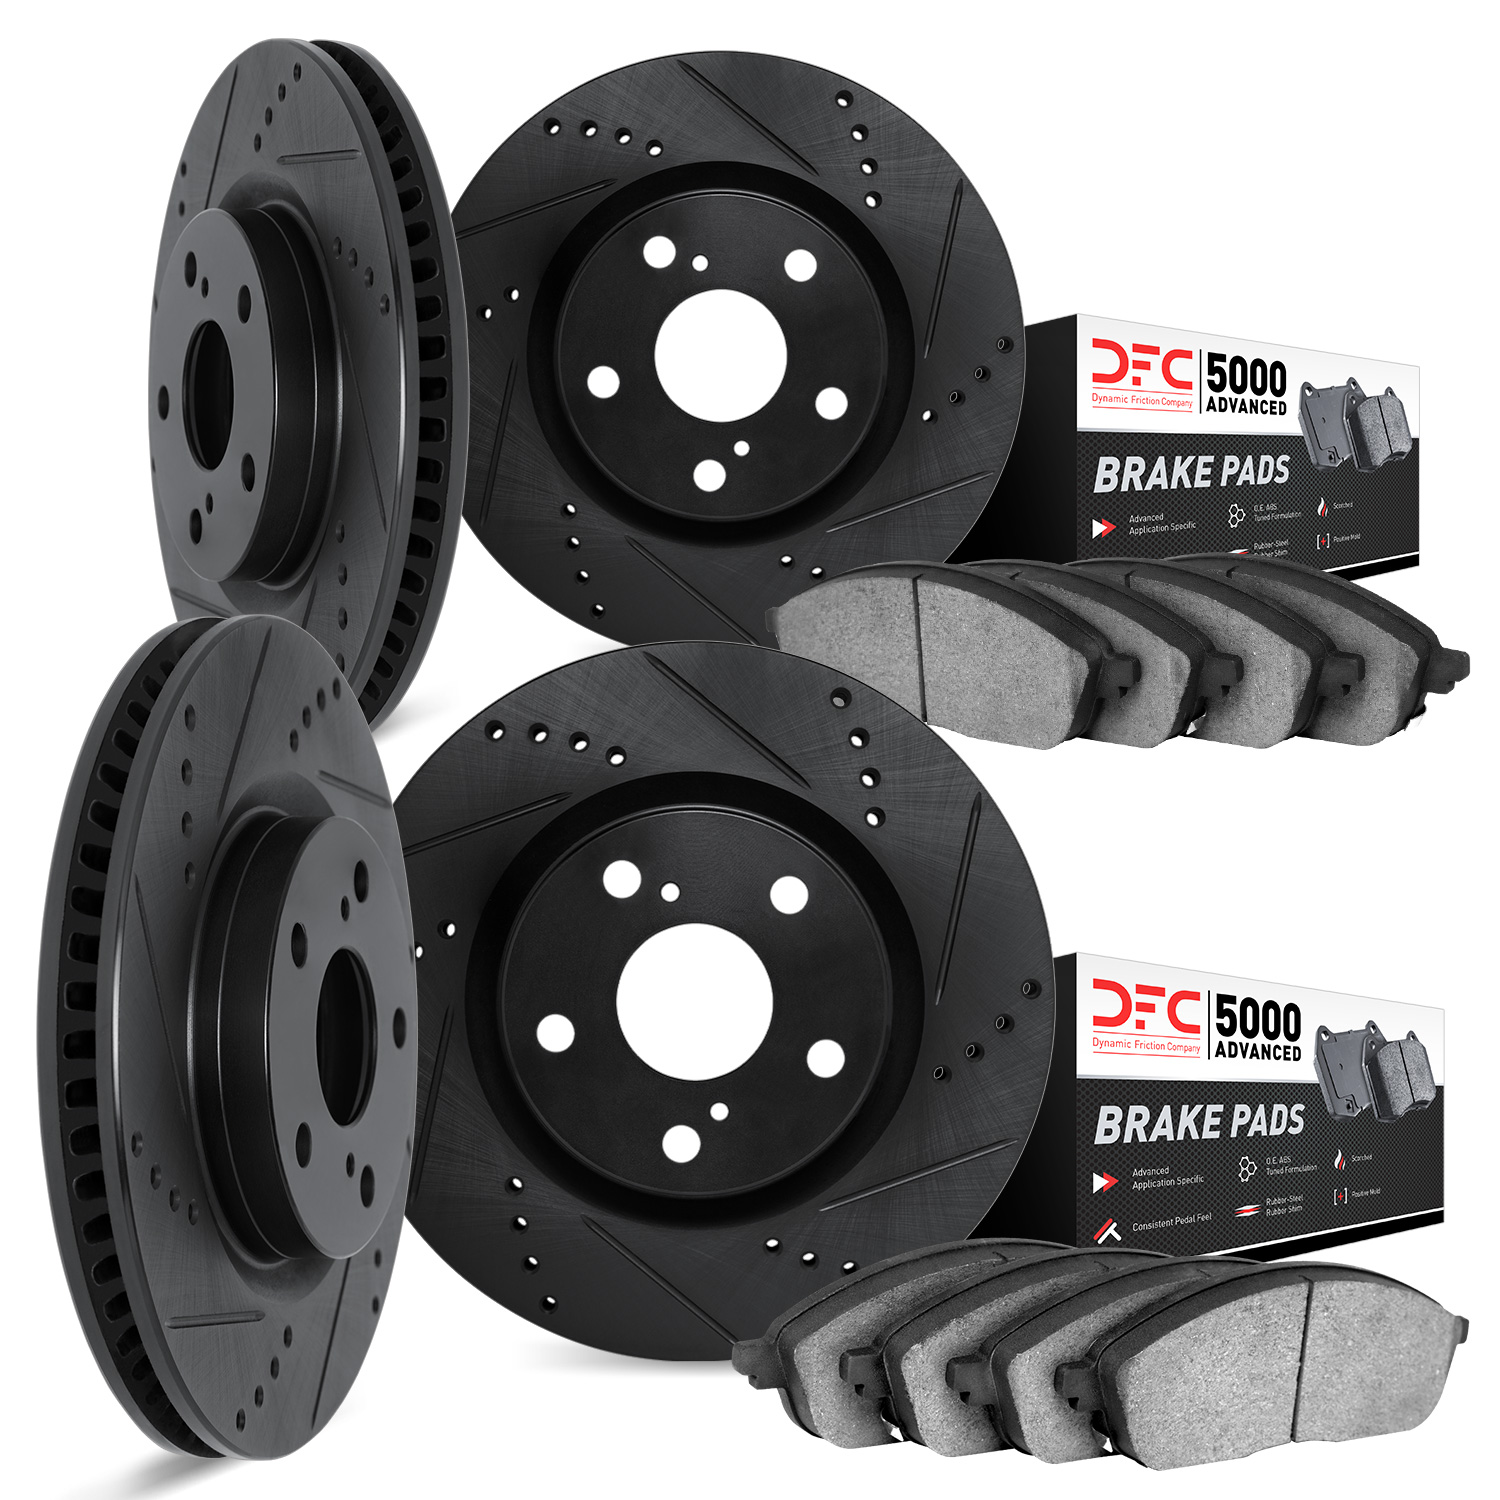 8504-31037 Drilled/Slotted Brake Rotors w/5000 Advanced Brake Pads Kit [Black], 2011-2015 BMW, Position: Front and Rear